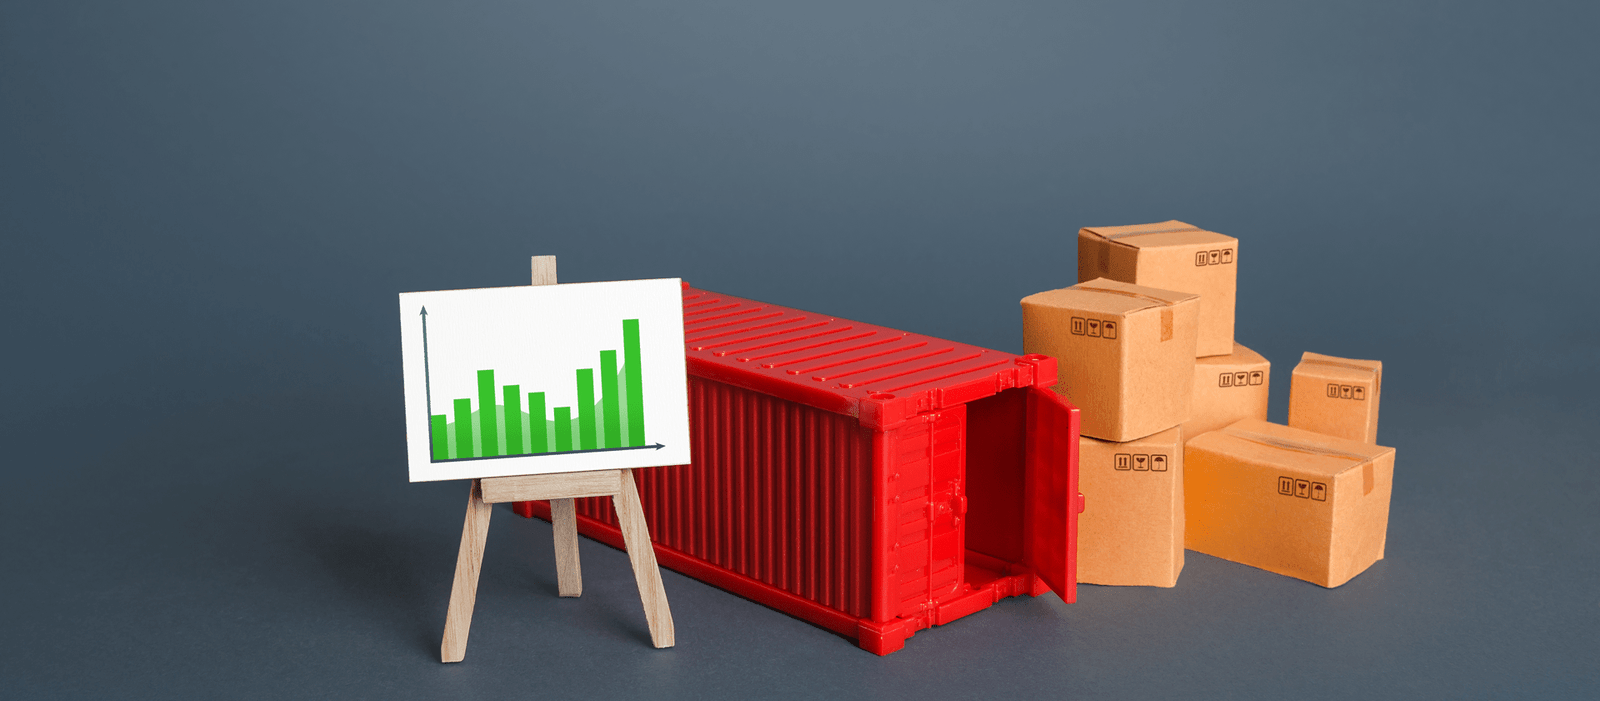 shipping container boxes near easel with positive growth graph world trade traffic recovery